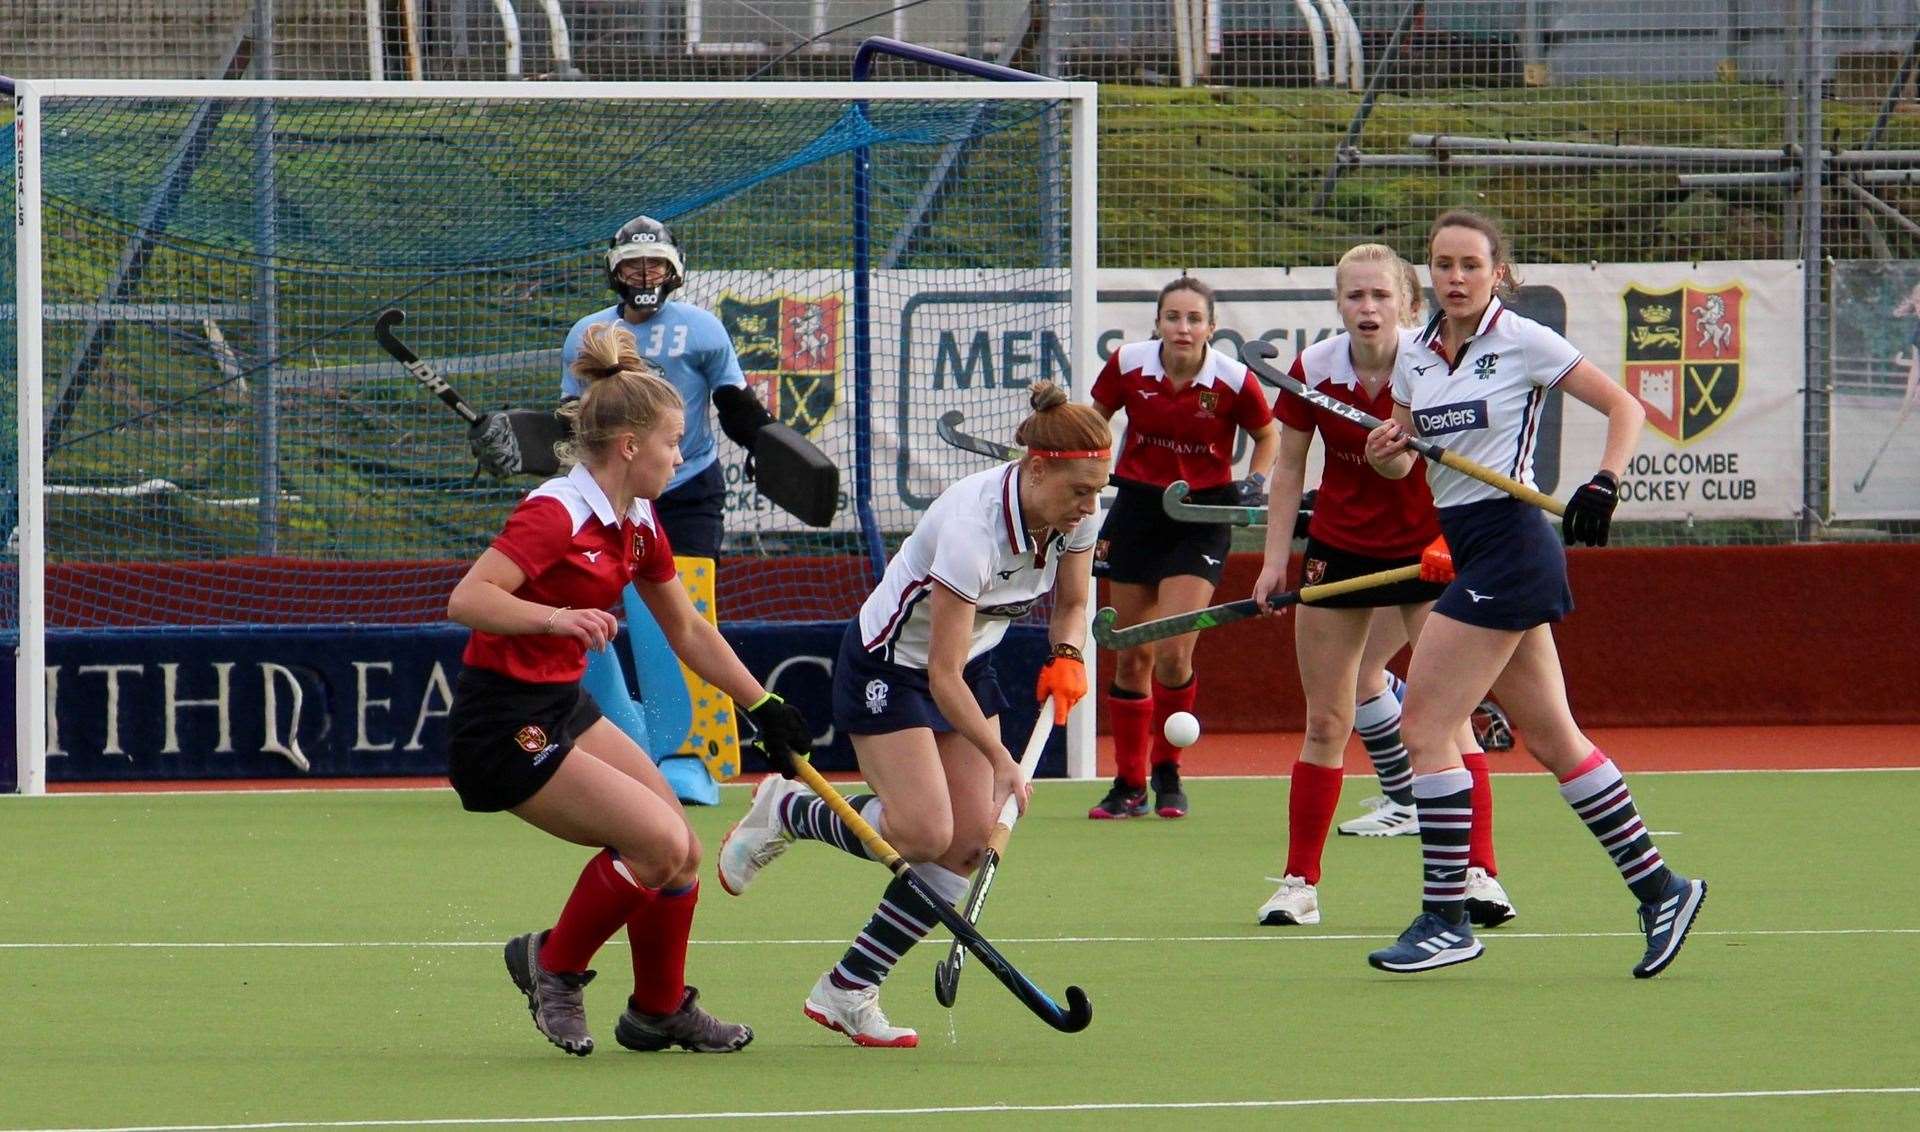 Holcombe Women were up against Surbiton 2s at Holcombe Park Picture: Jon Goodall